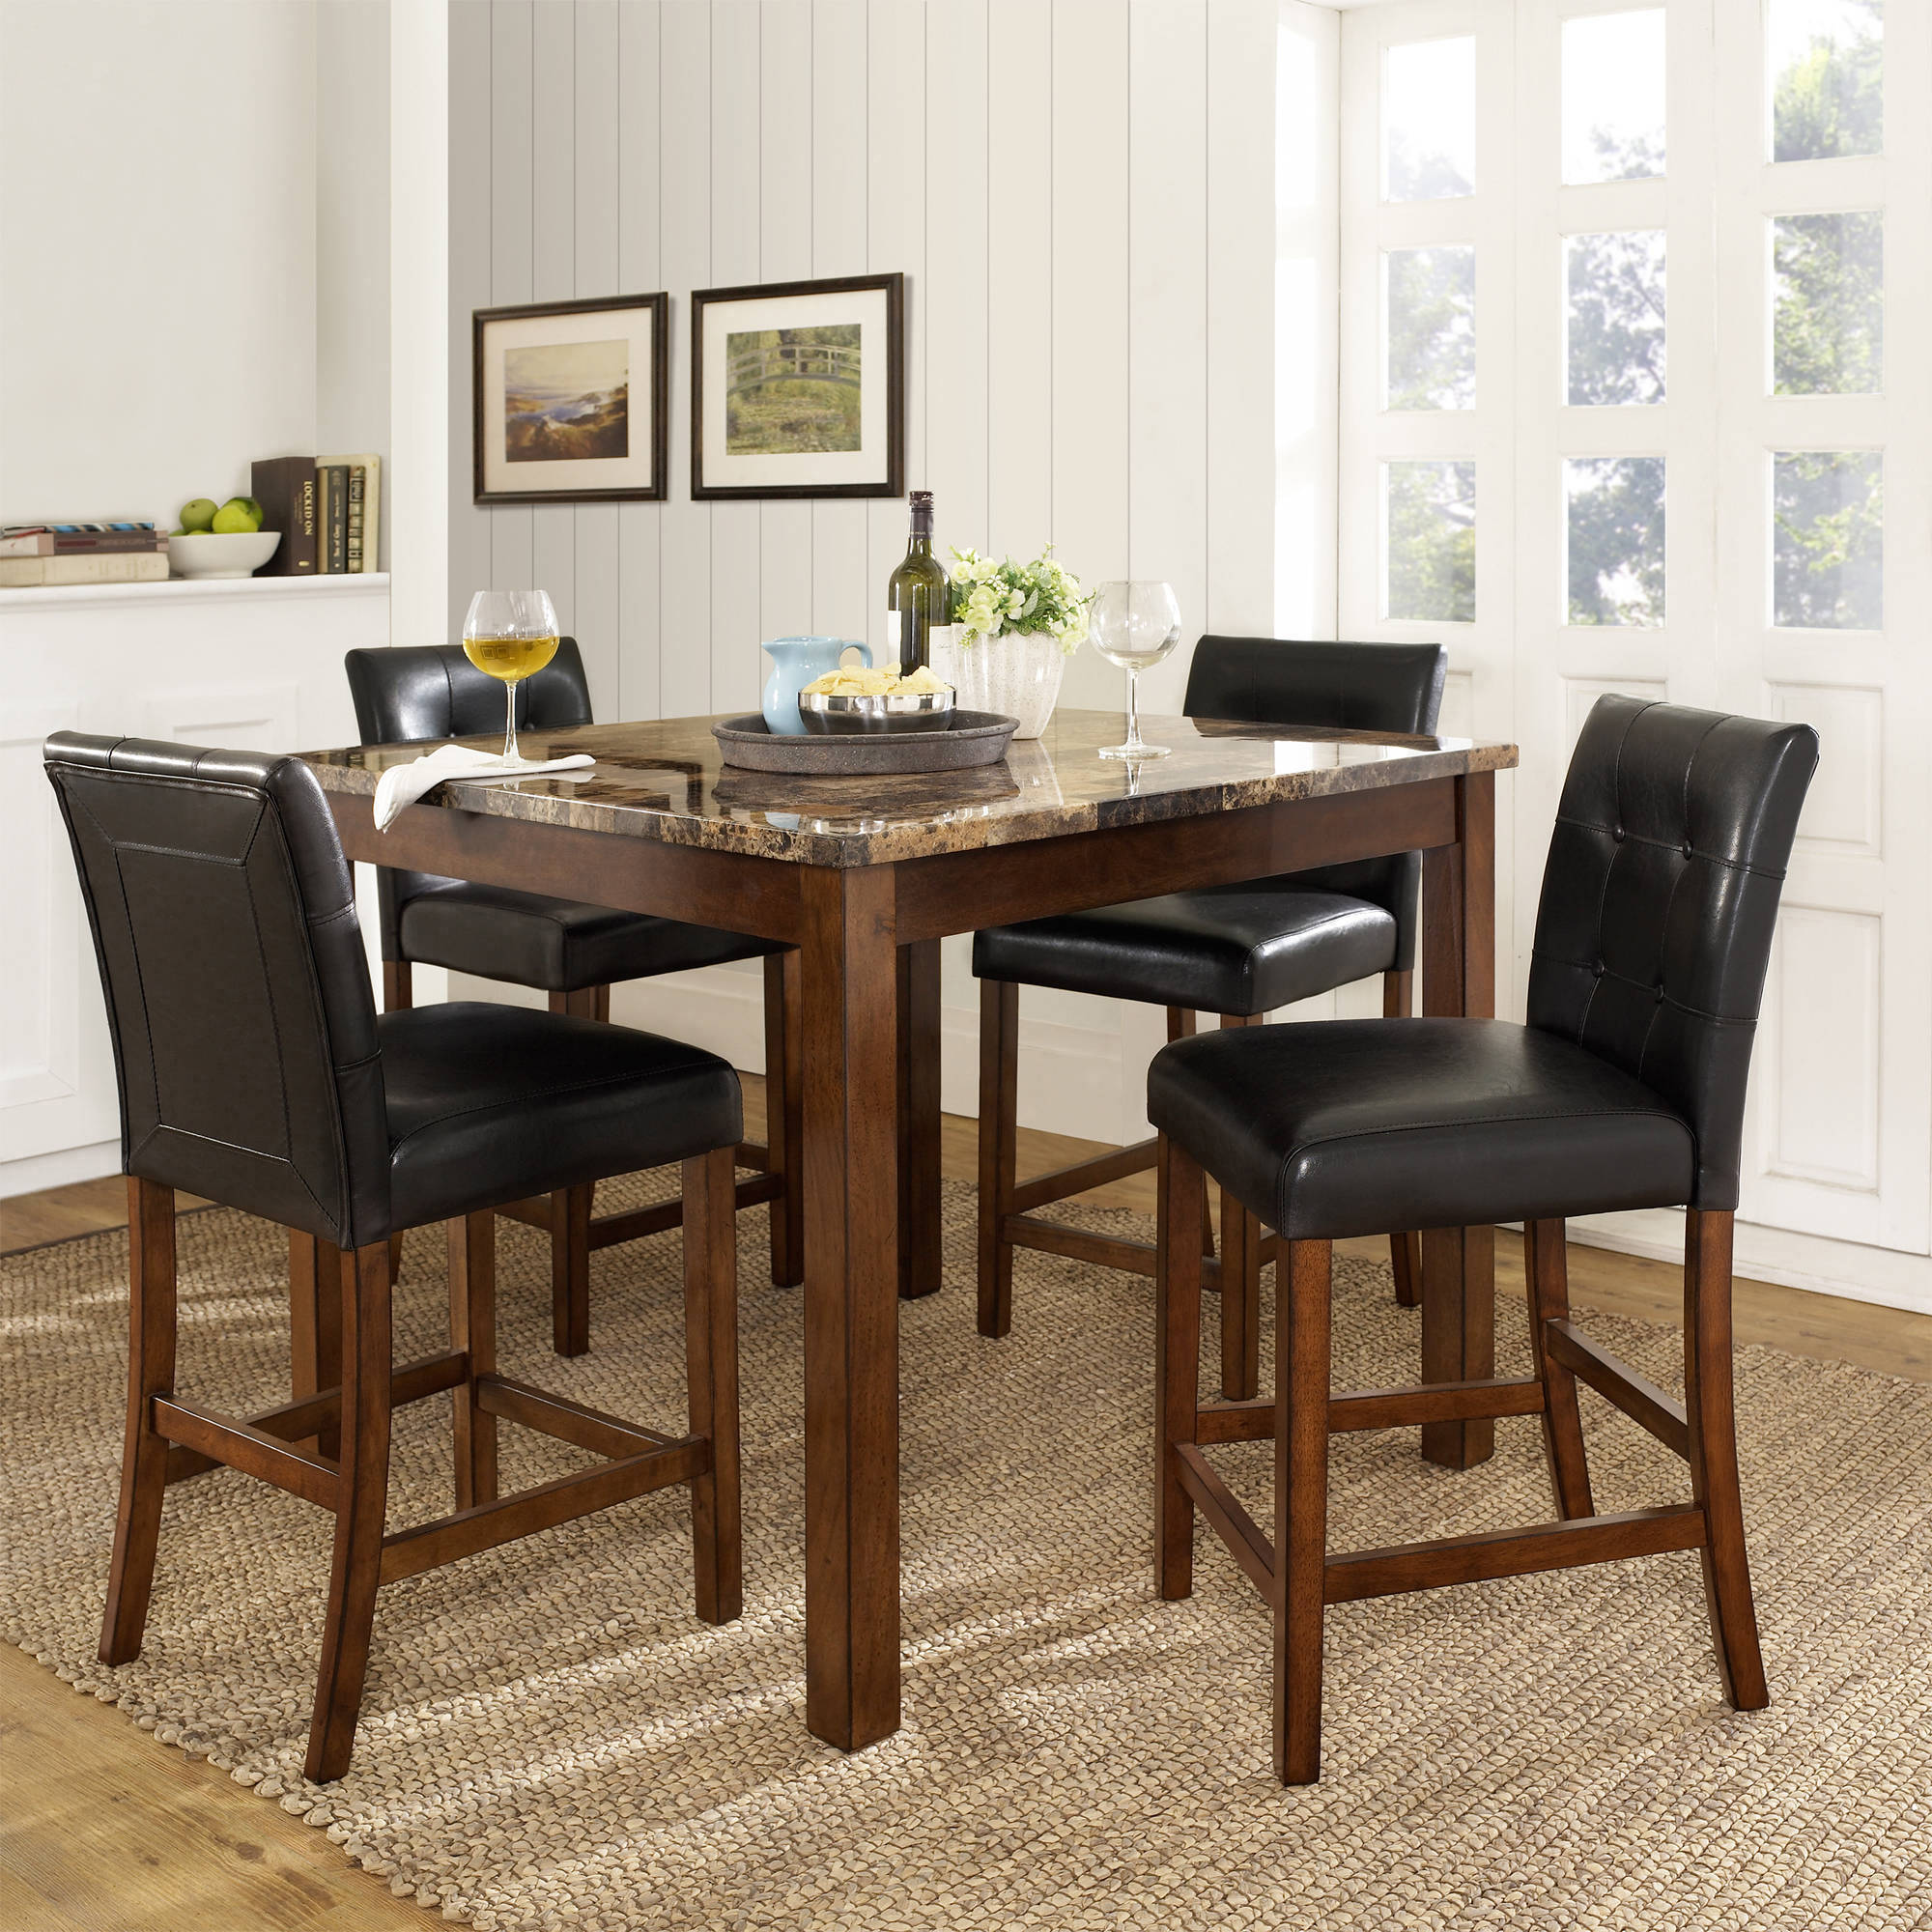 excellent dining room table and chairs 95 for your dining room table sets UMPMDLE